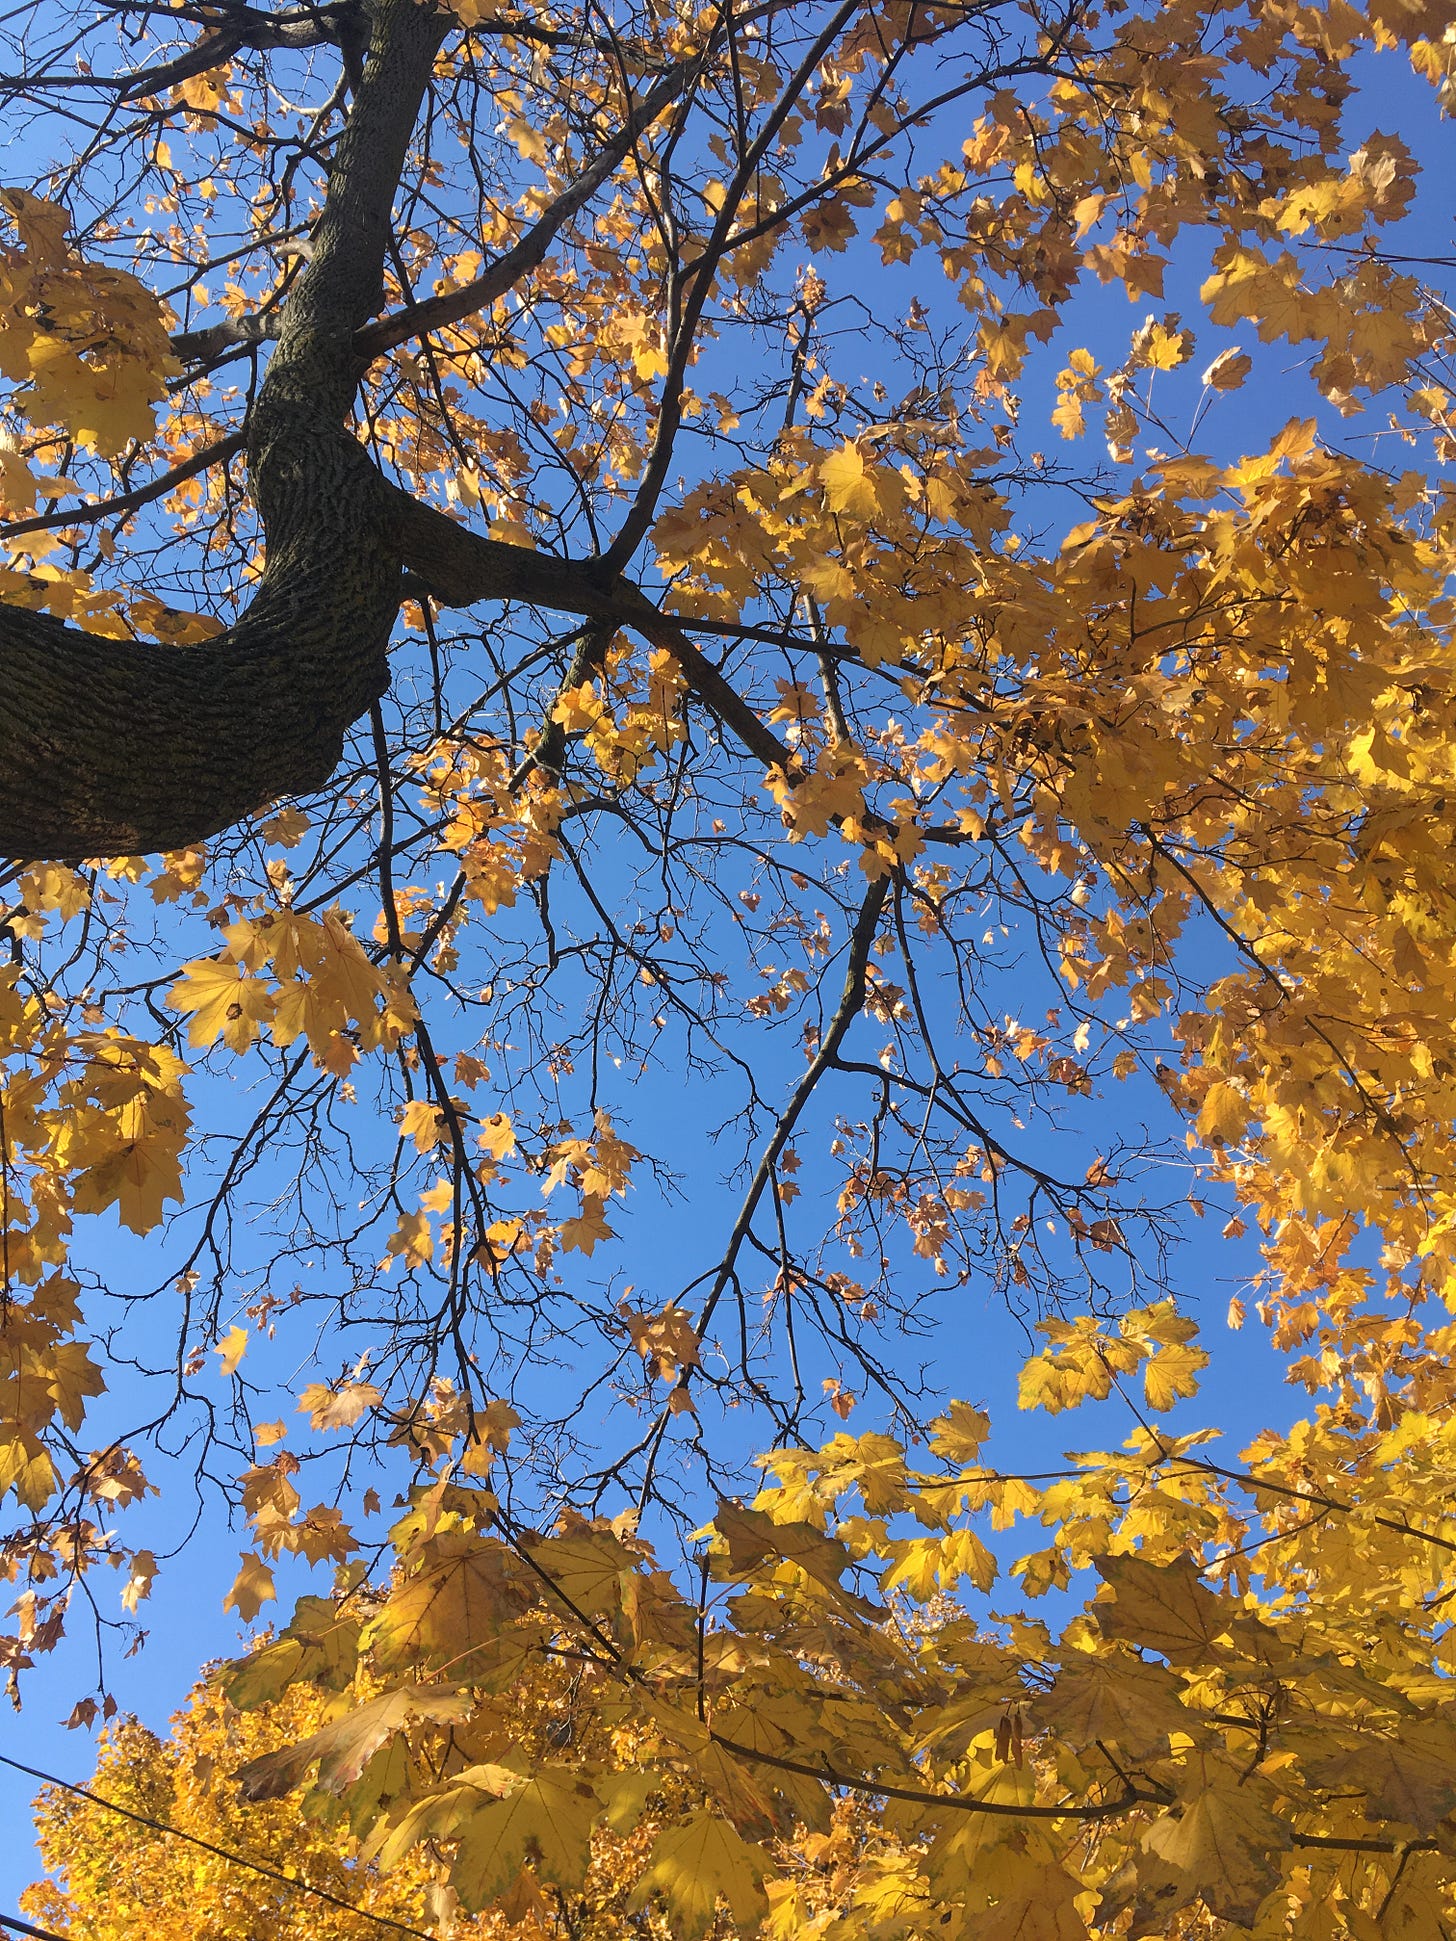 Looking up to a clear blue November sky, we see the golden leaves of an autumn-changed tree.